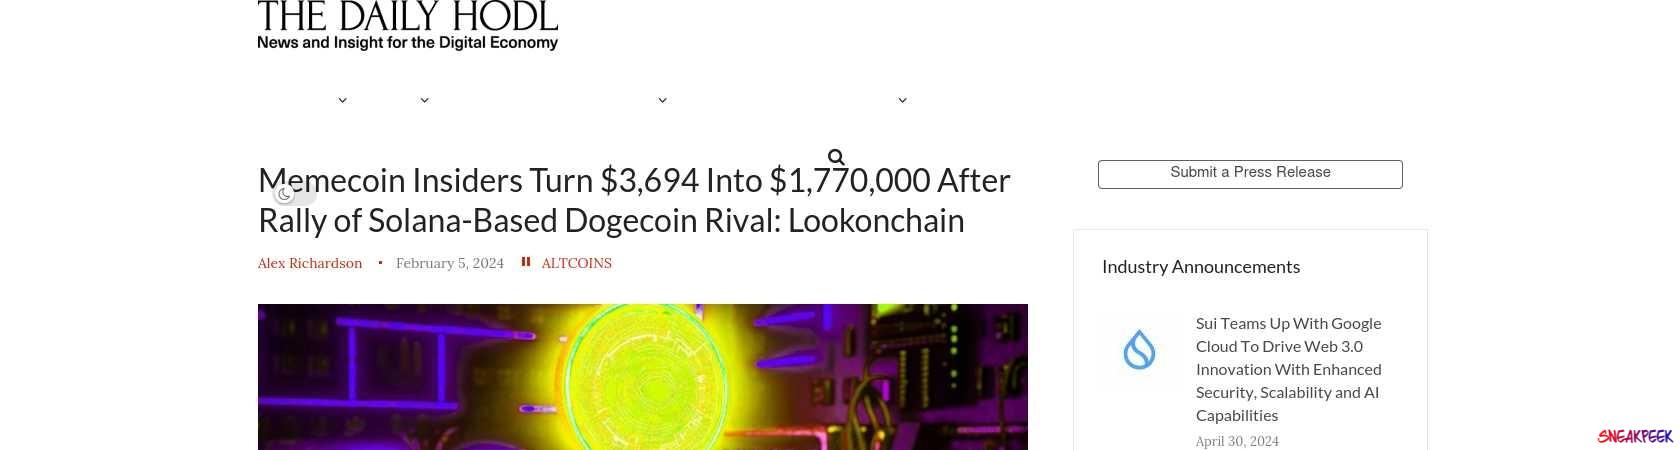 Read the full Article:  ⭲ Memecoin Insiders Turn $3,694 Into $1,770,000 After Rally of Solana-Based Dogecoin Rival: Lookonchain